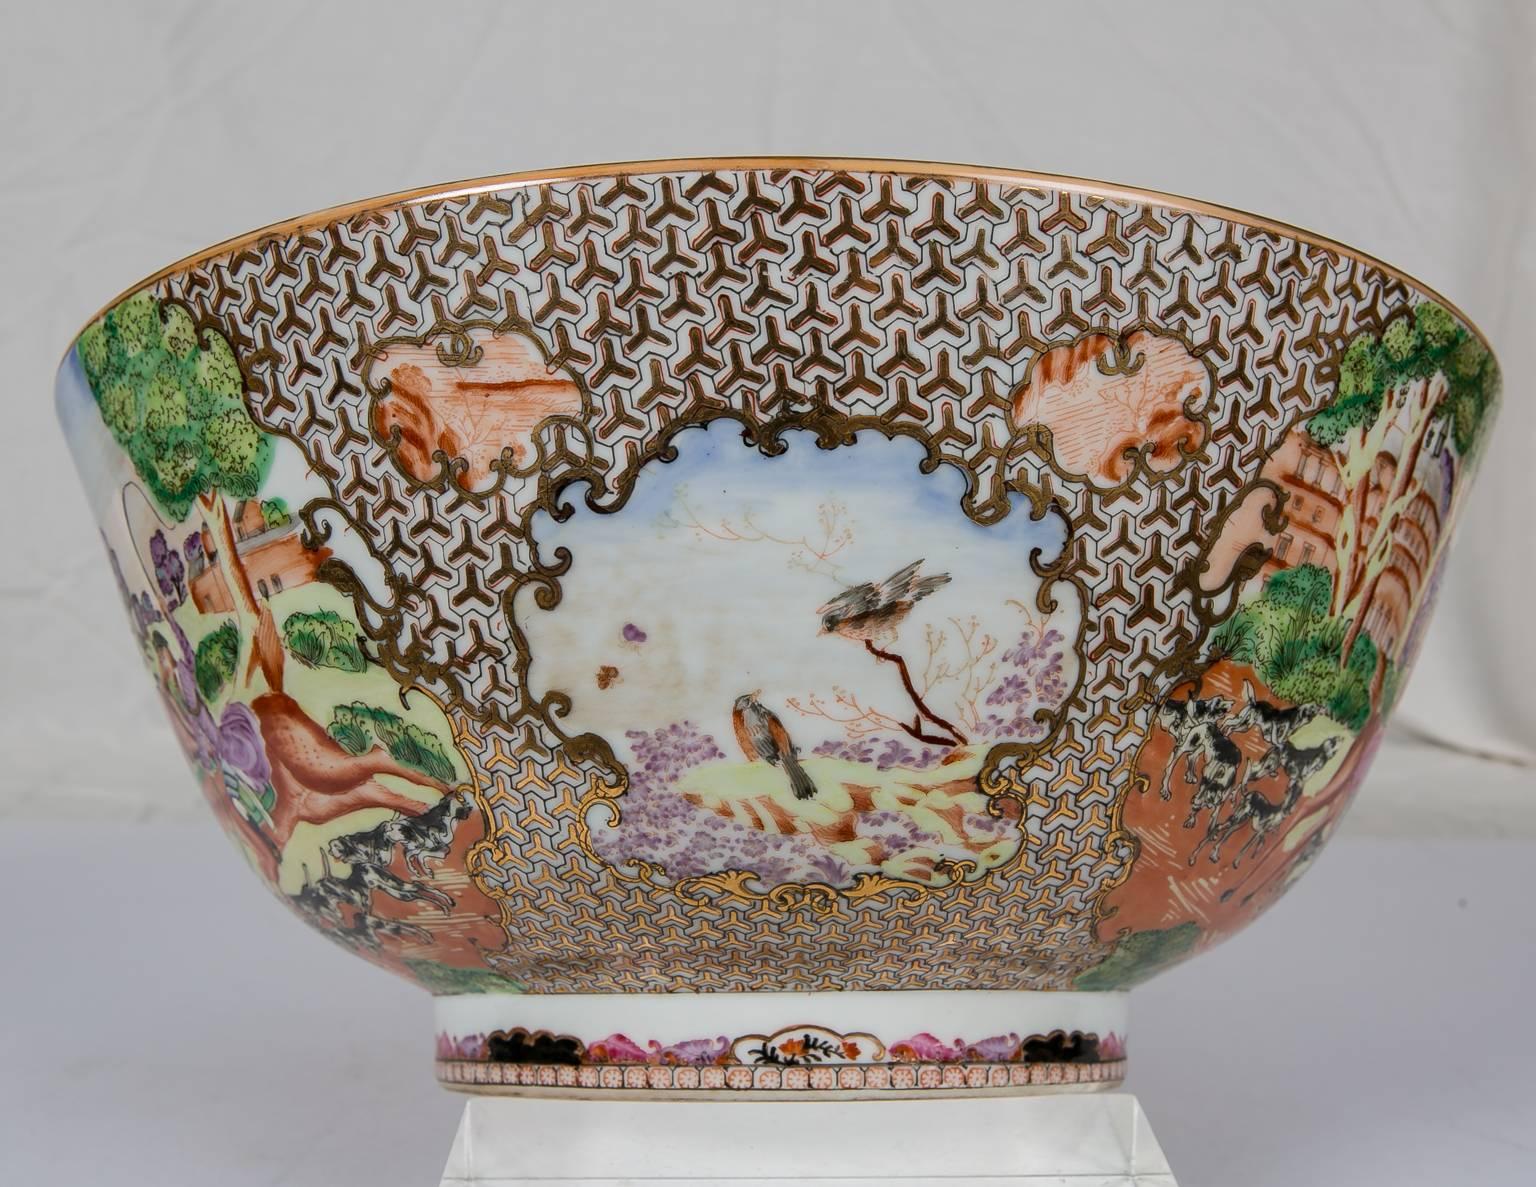 20th Century Fine Reproduction Chinese Porcelain Hunt Bowl with 18th Century Scene